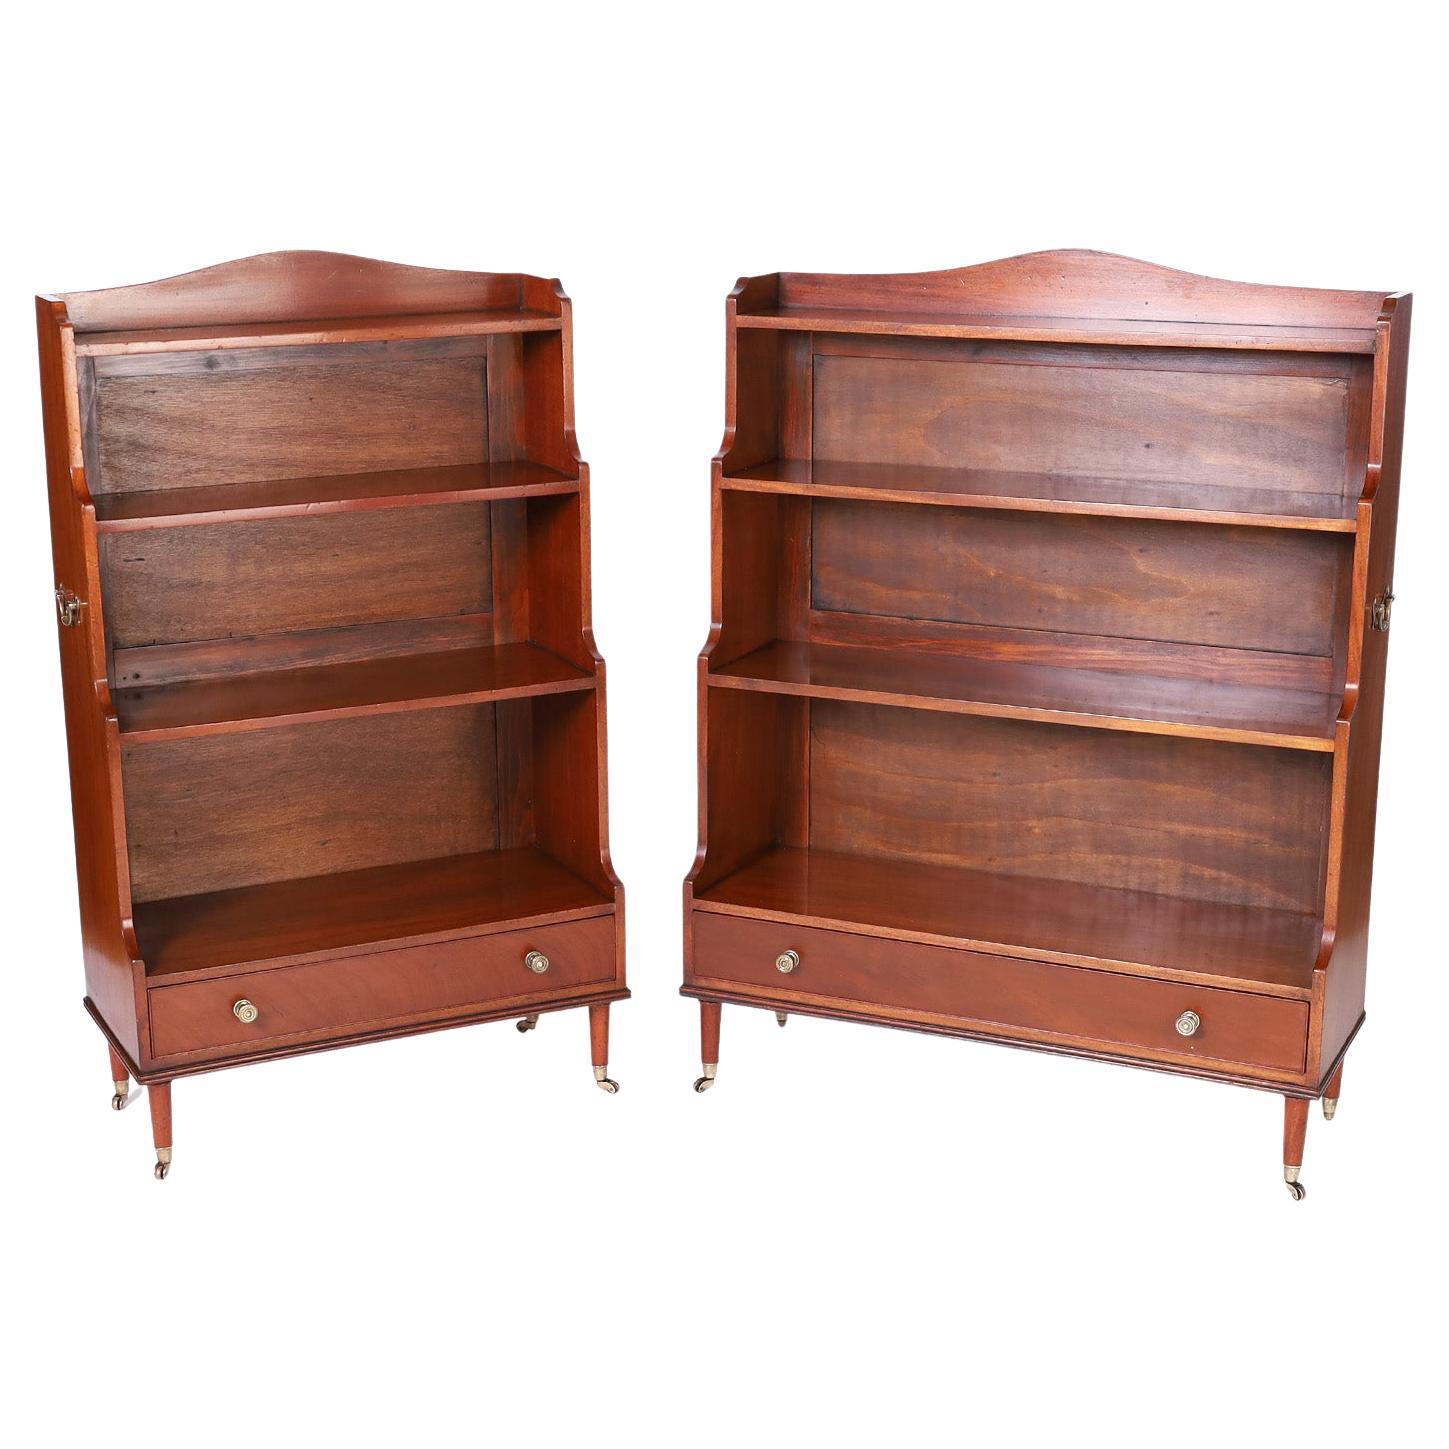 Two Antique English Bookcases For Sale